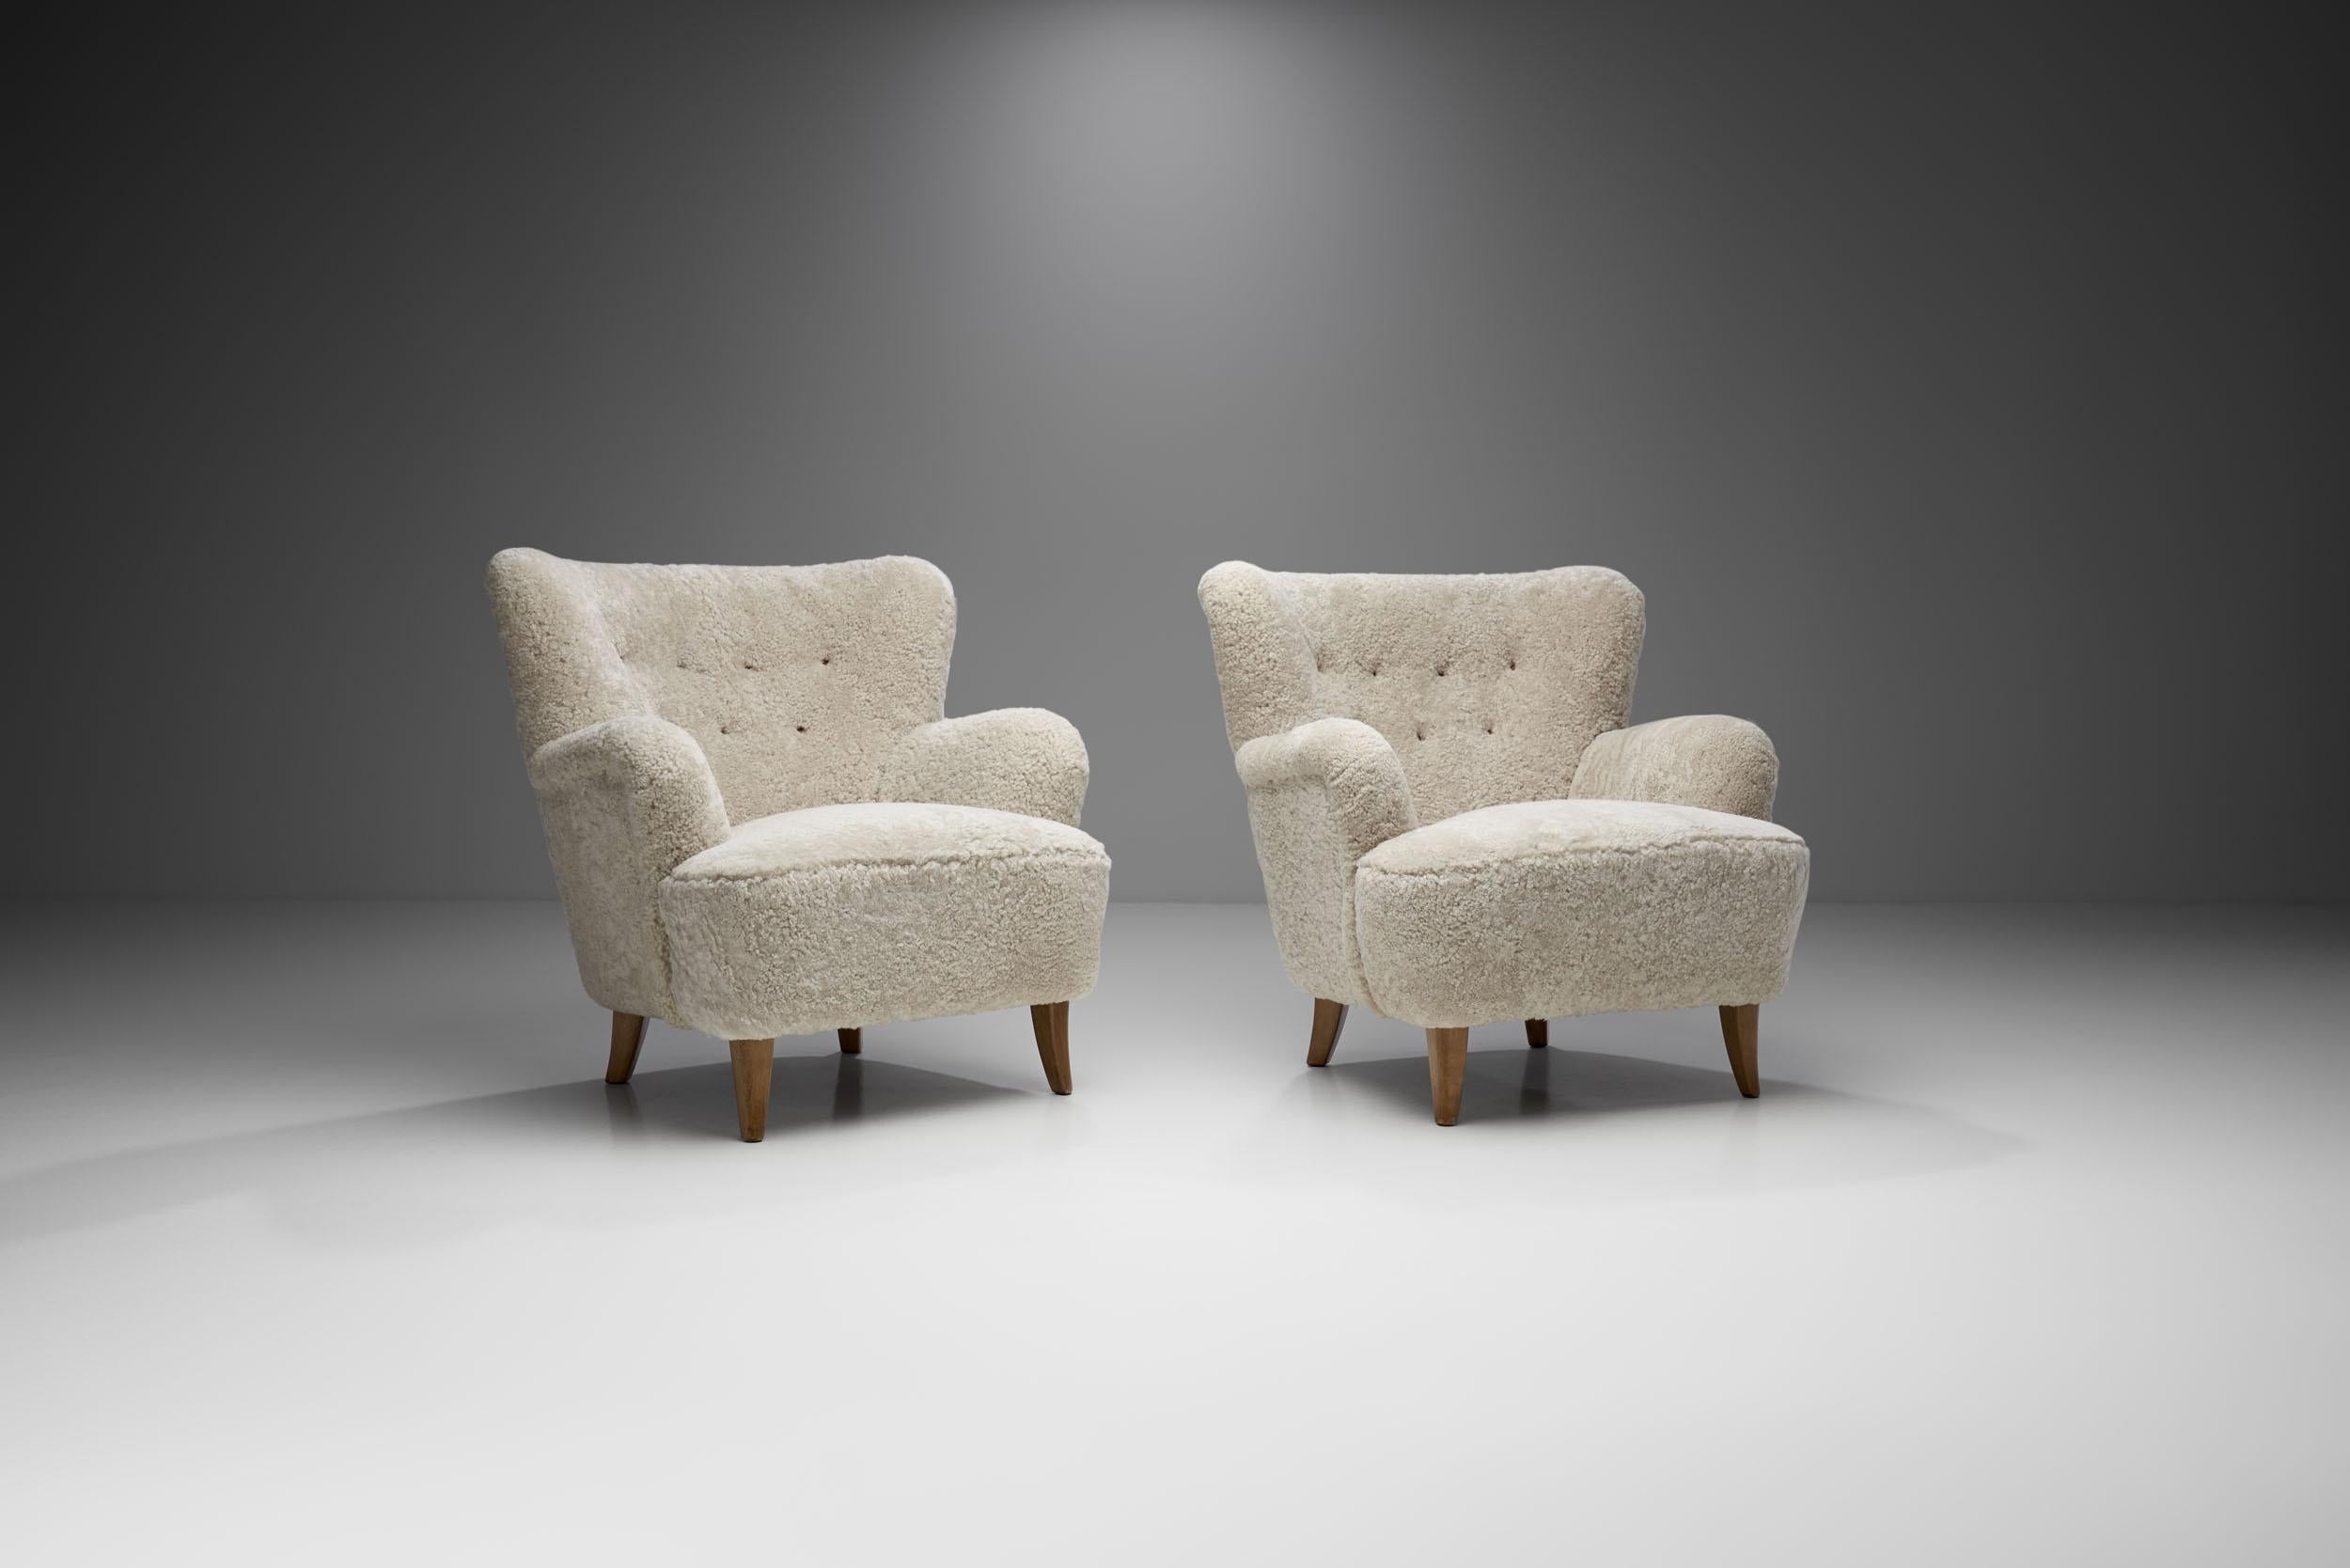 Pair of “Laila” Armchairs in Sheepskin by Ilmari Lappalainen, Finland 1948 In Good Condition For Sale In Utrecht, NL